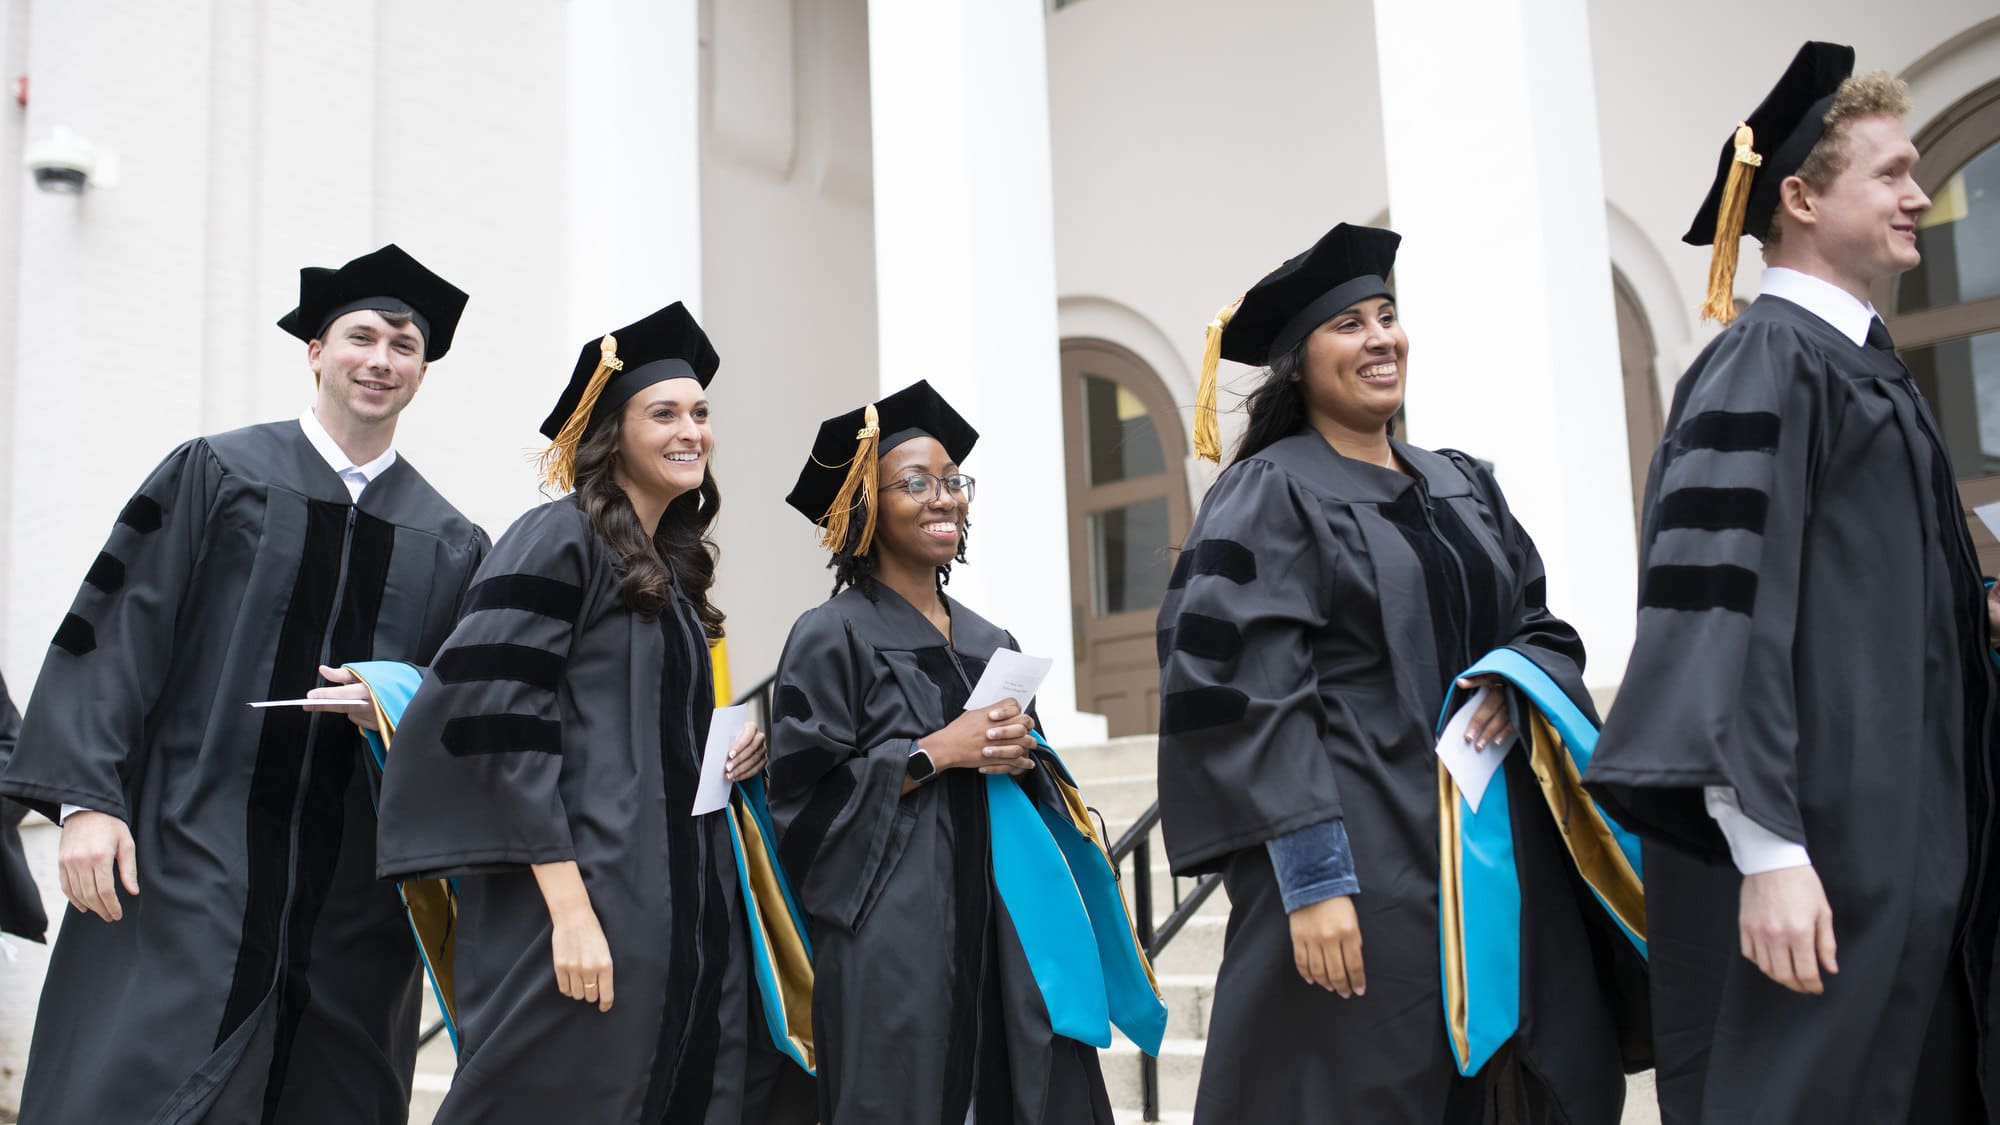 Students in a line during a graduation ceremony